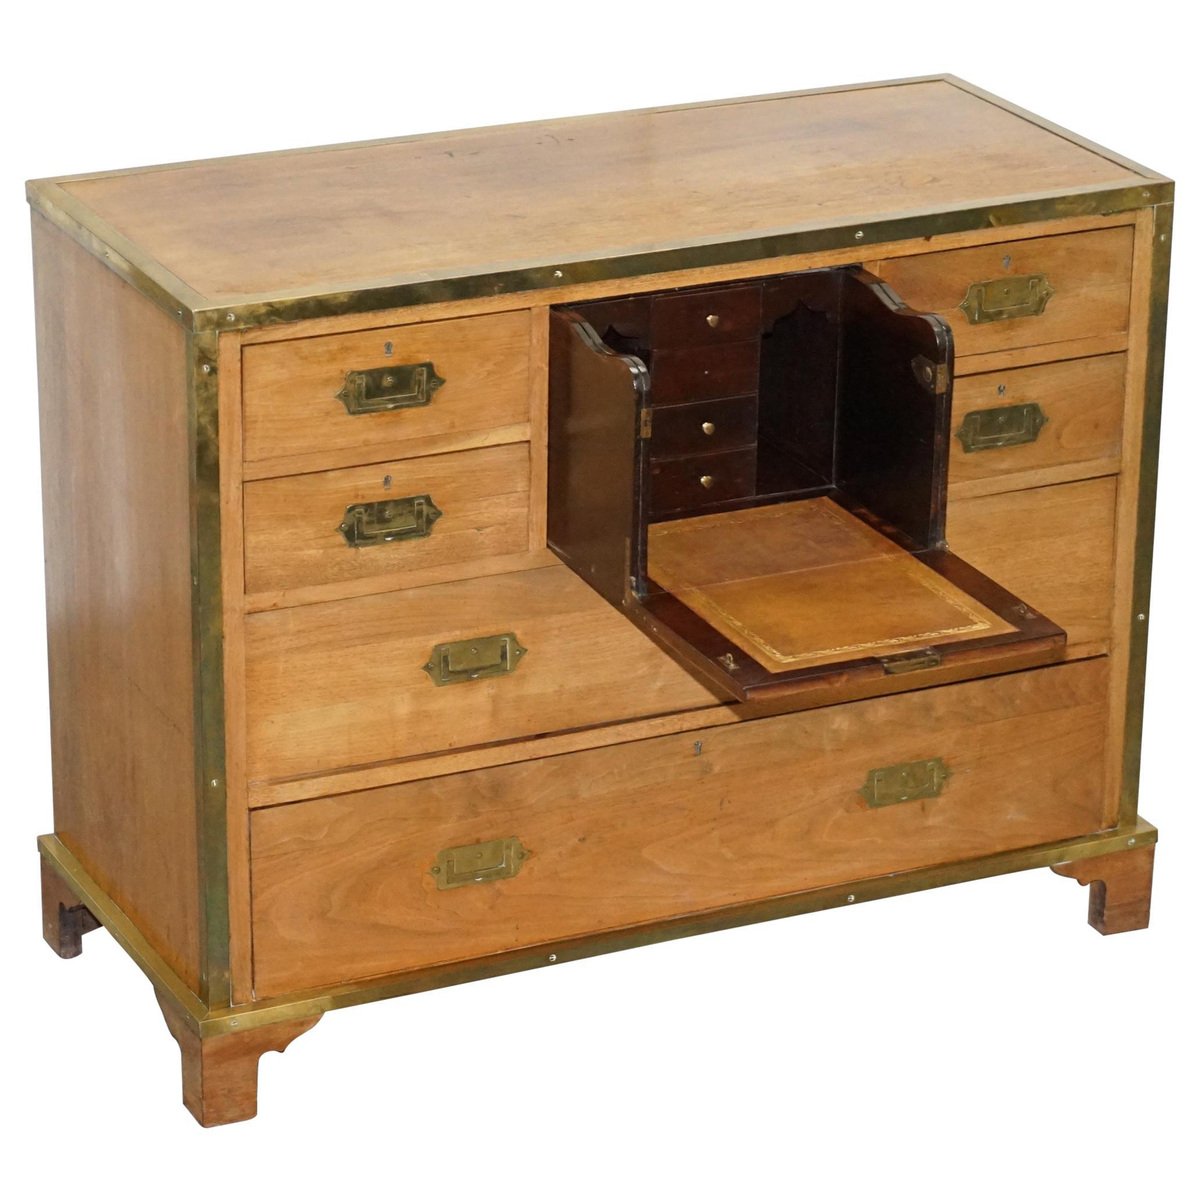 solid oak brass military campaign chest of drawers with secretaire desk 1880s GZP-1006379